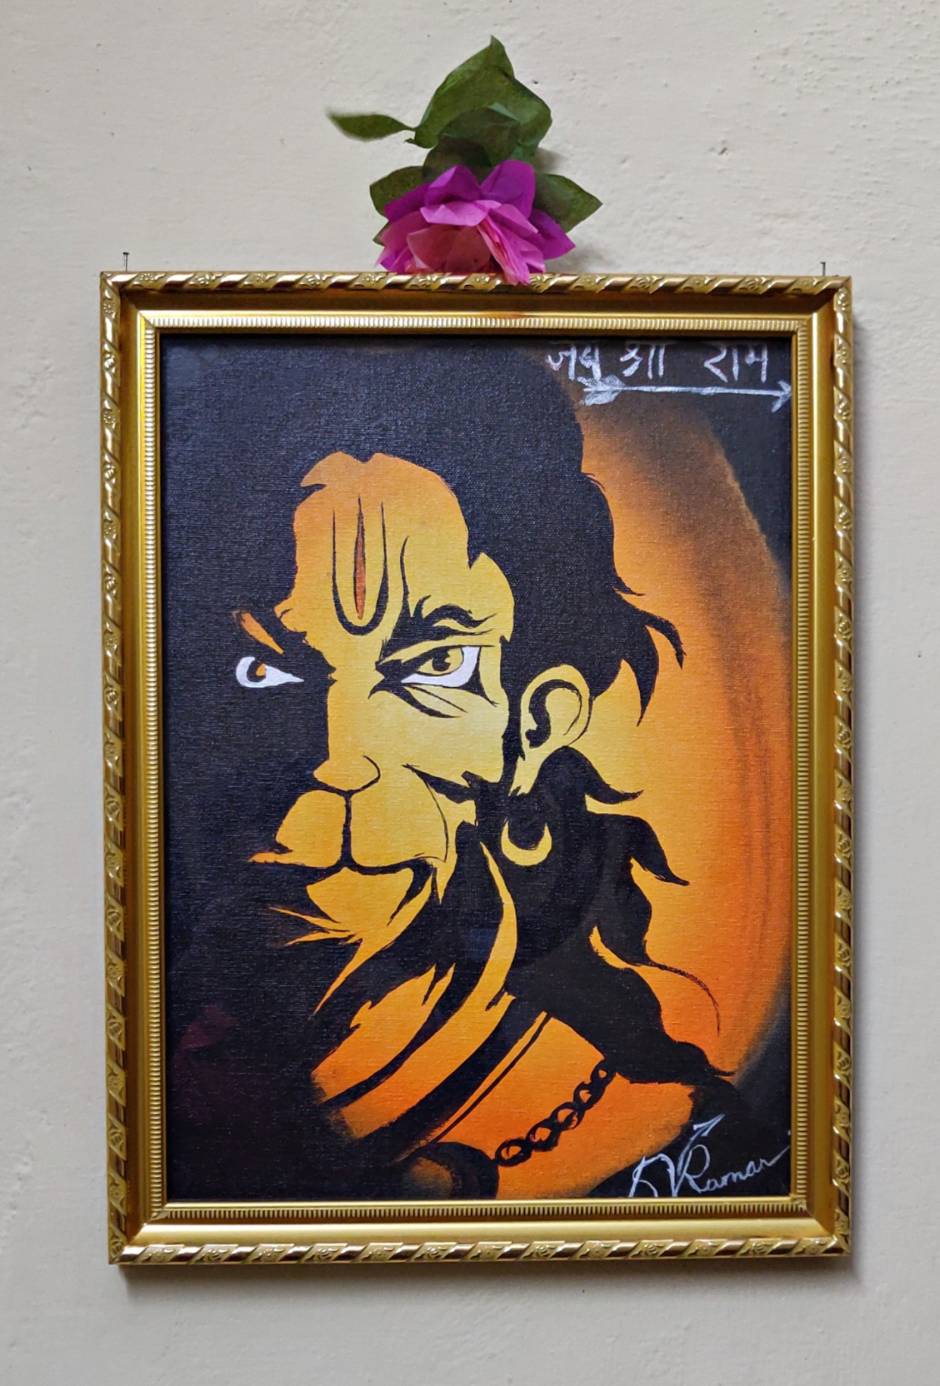 EU Hanuman Metal Wall Art Hanging with LED for Home, Temple, Mandir, living  room, & Hospitality Spaces - Gift for Anniversaries, Birthdays, Diwali,  Parents, Metal Laser CNC Wall Art 50x40 Size